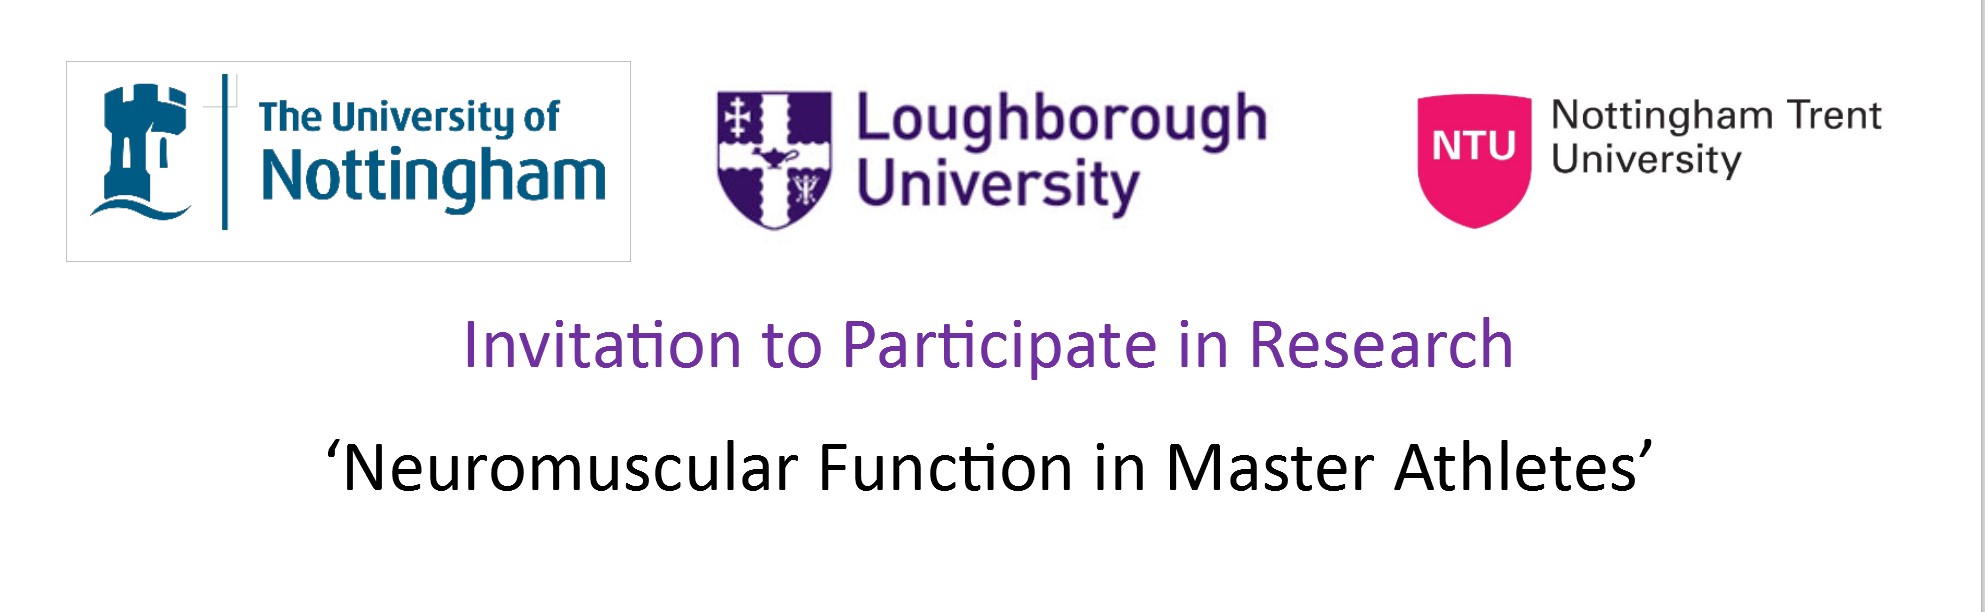 Nottingham University Invitation to participate in research